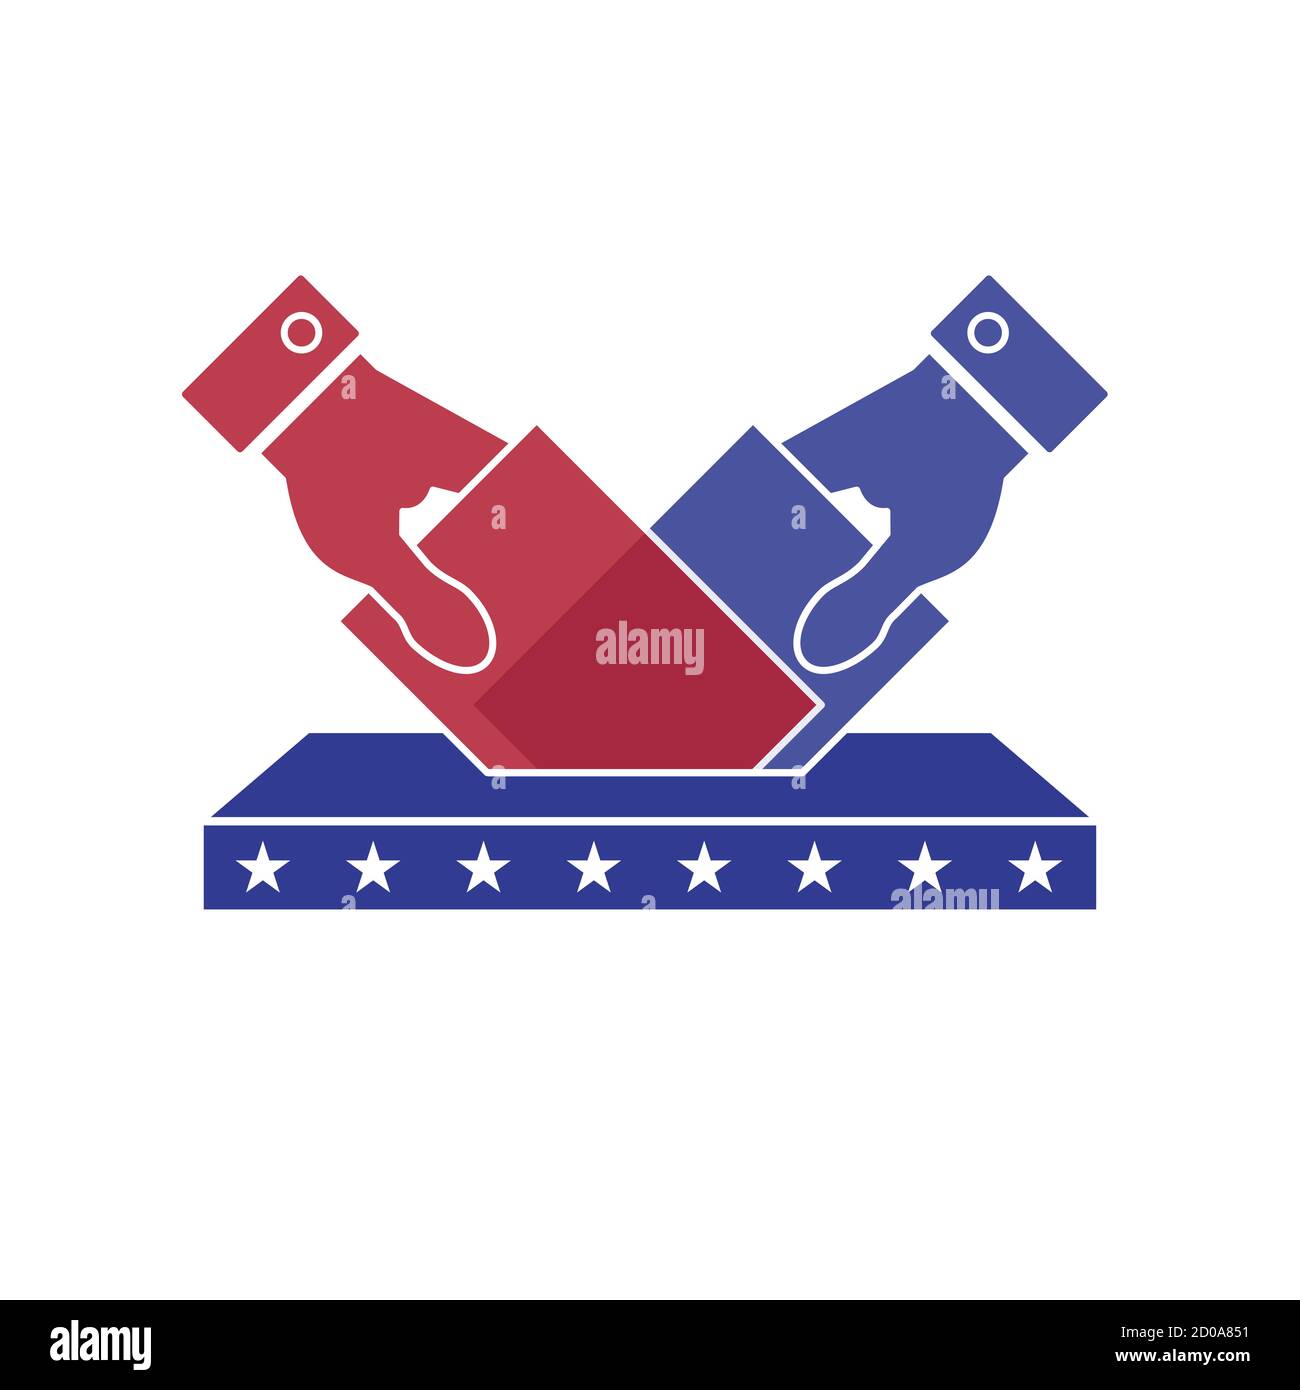 Two hands putting voting icon. 2020 United States presidential election. illustration. Stock Photo